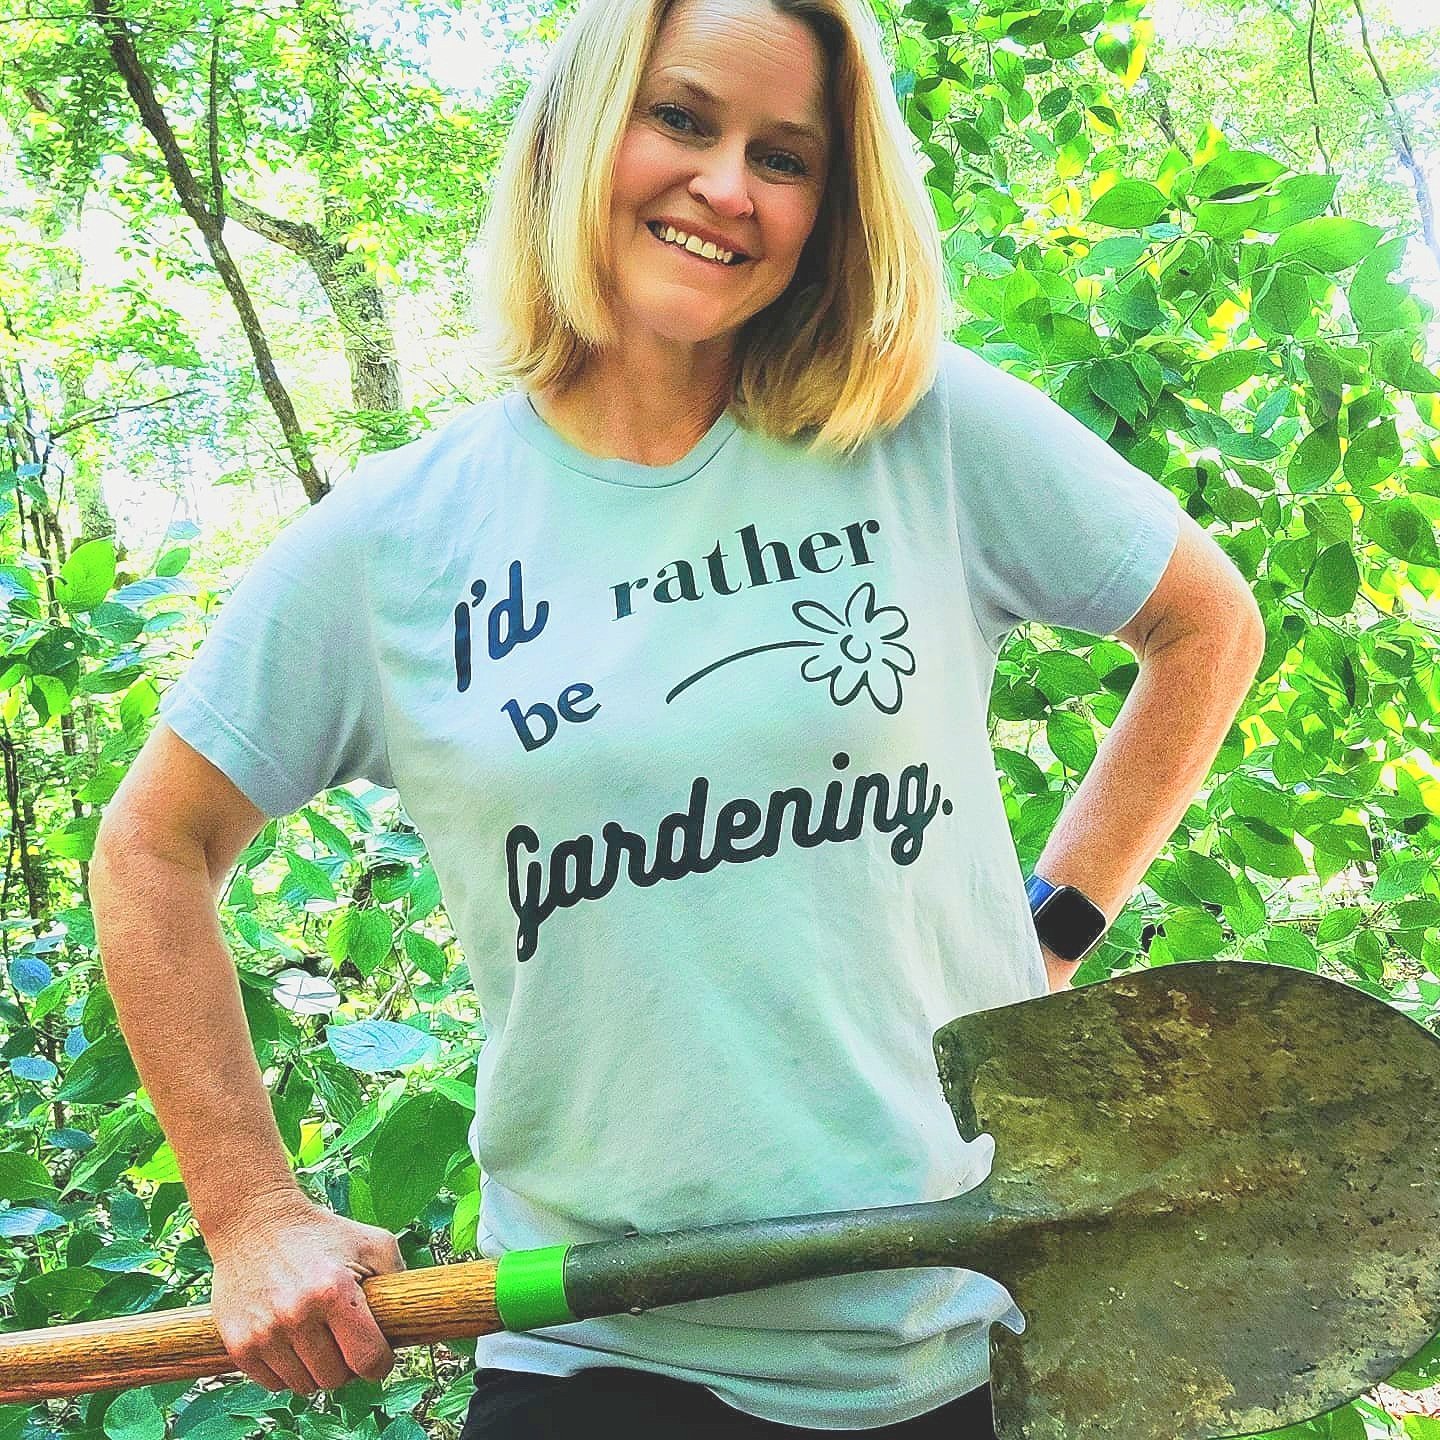 I'd Rather Be Gardening. Jersey T Shirt, funny gardening — Plant Connections Unlimited Home Page